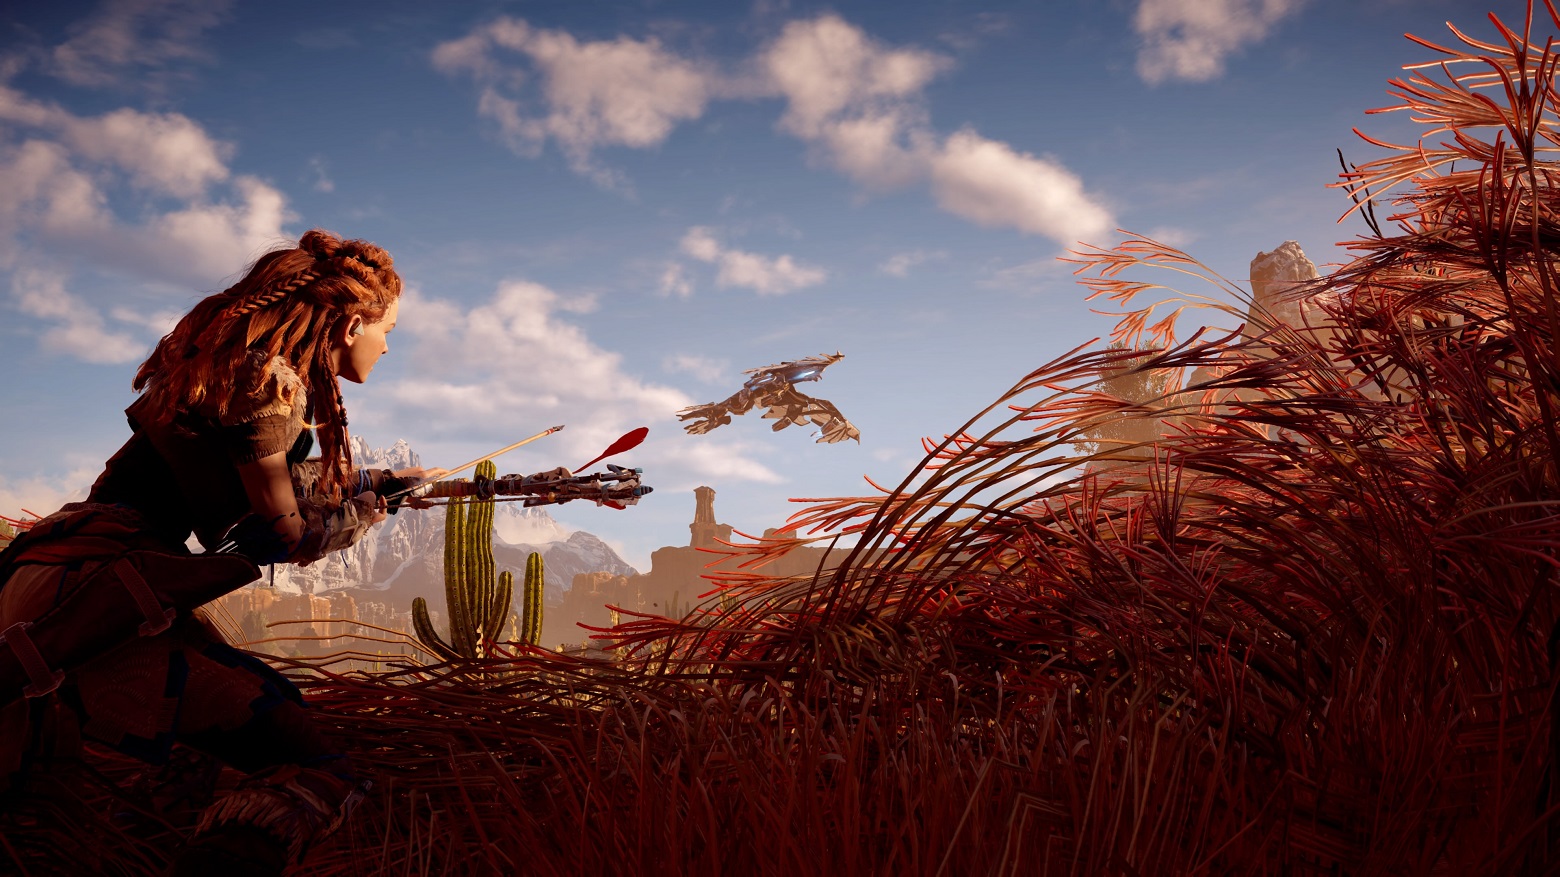 Horizon Zero Dawn Tips And Tricks For Navigating The Hottest New Open World Rpg Bgr